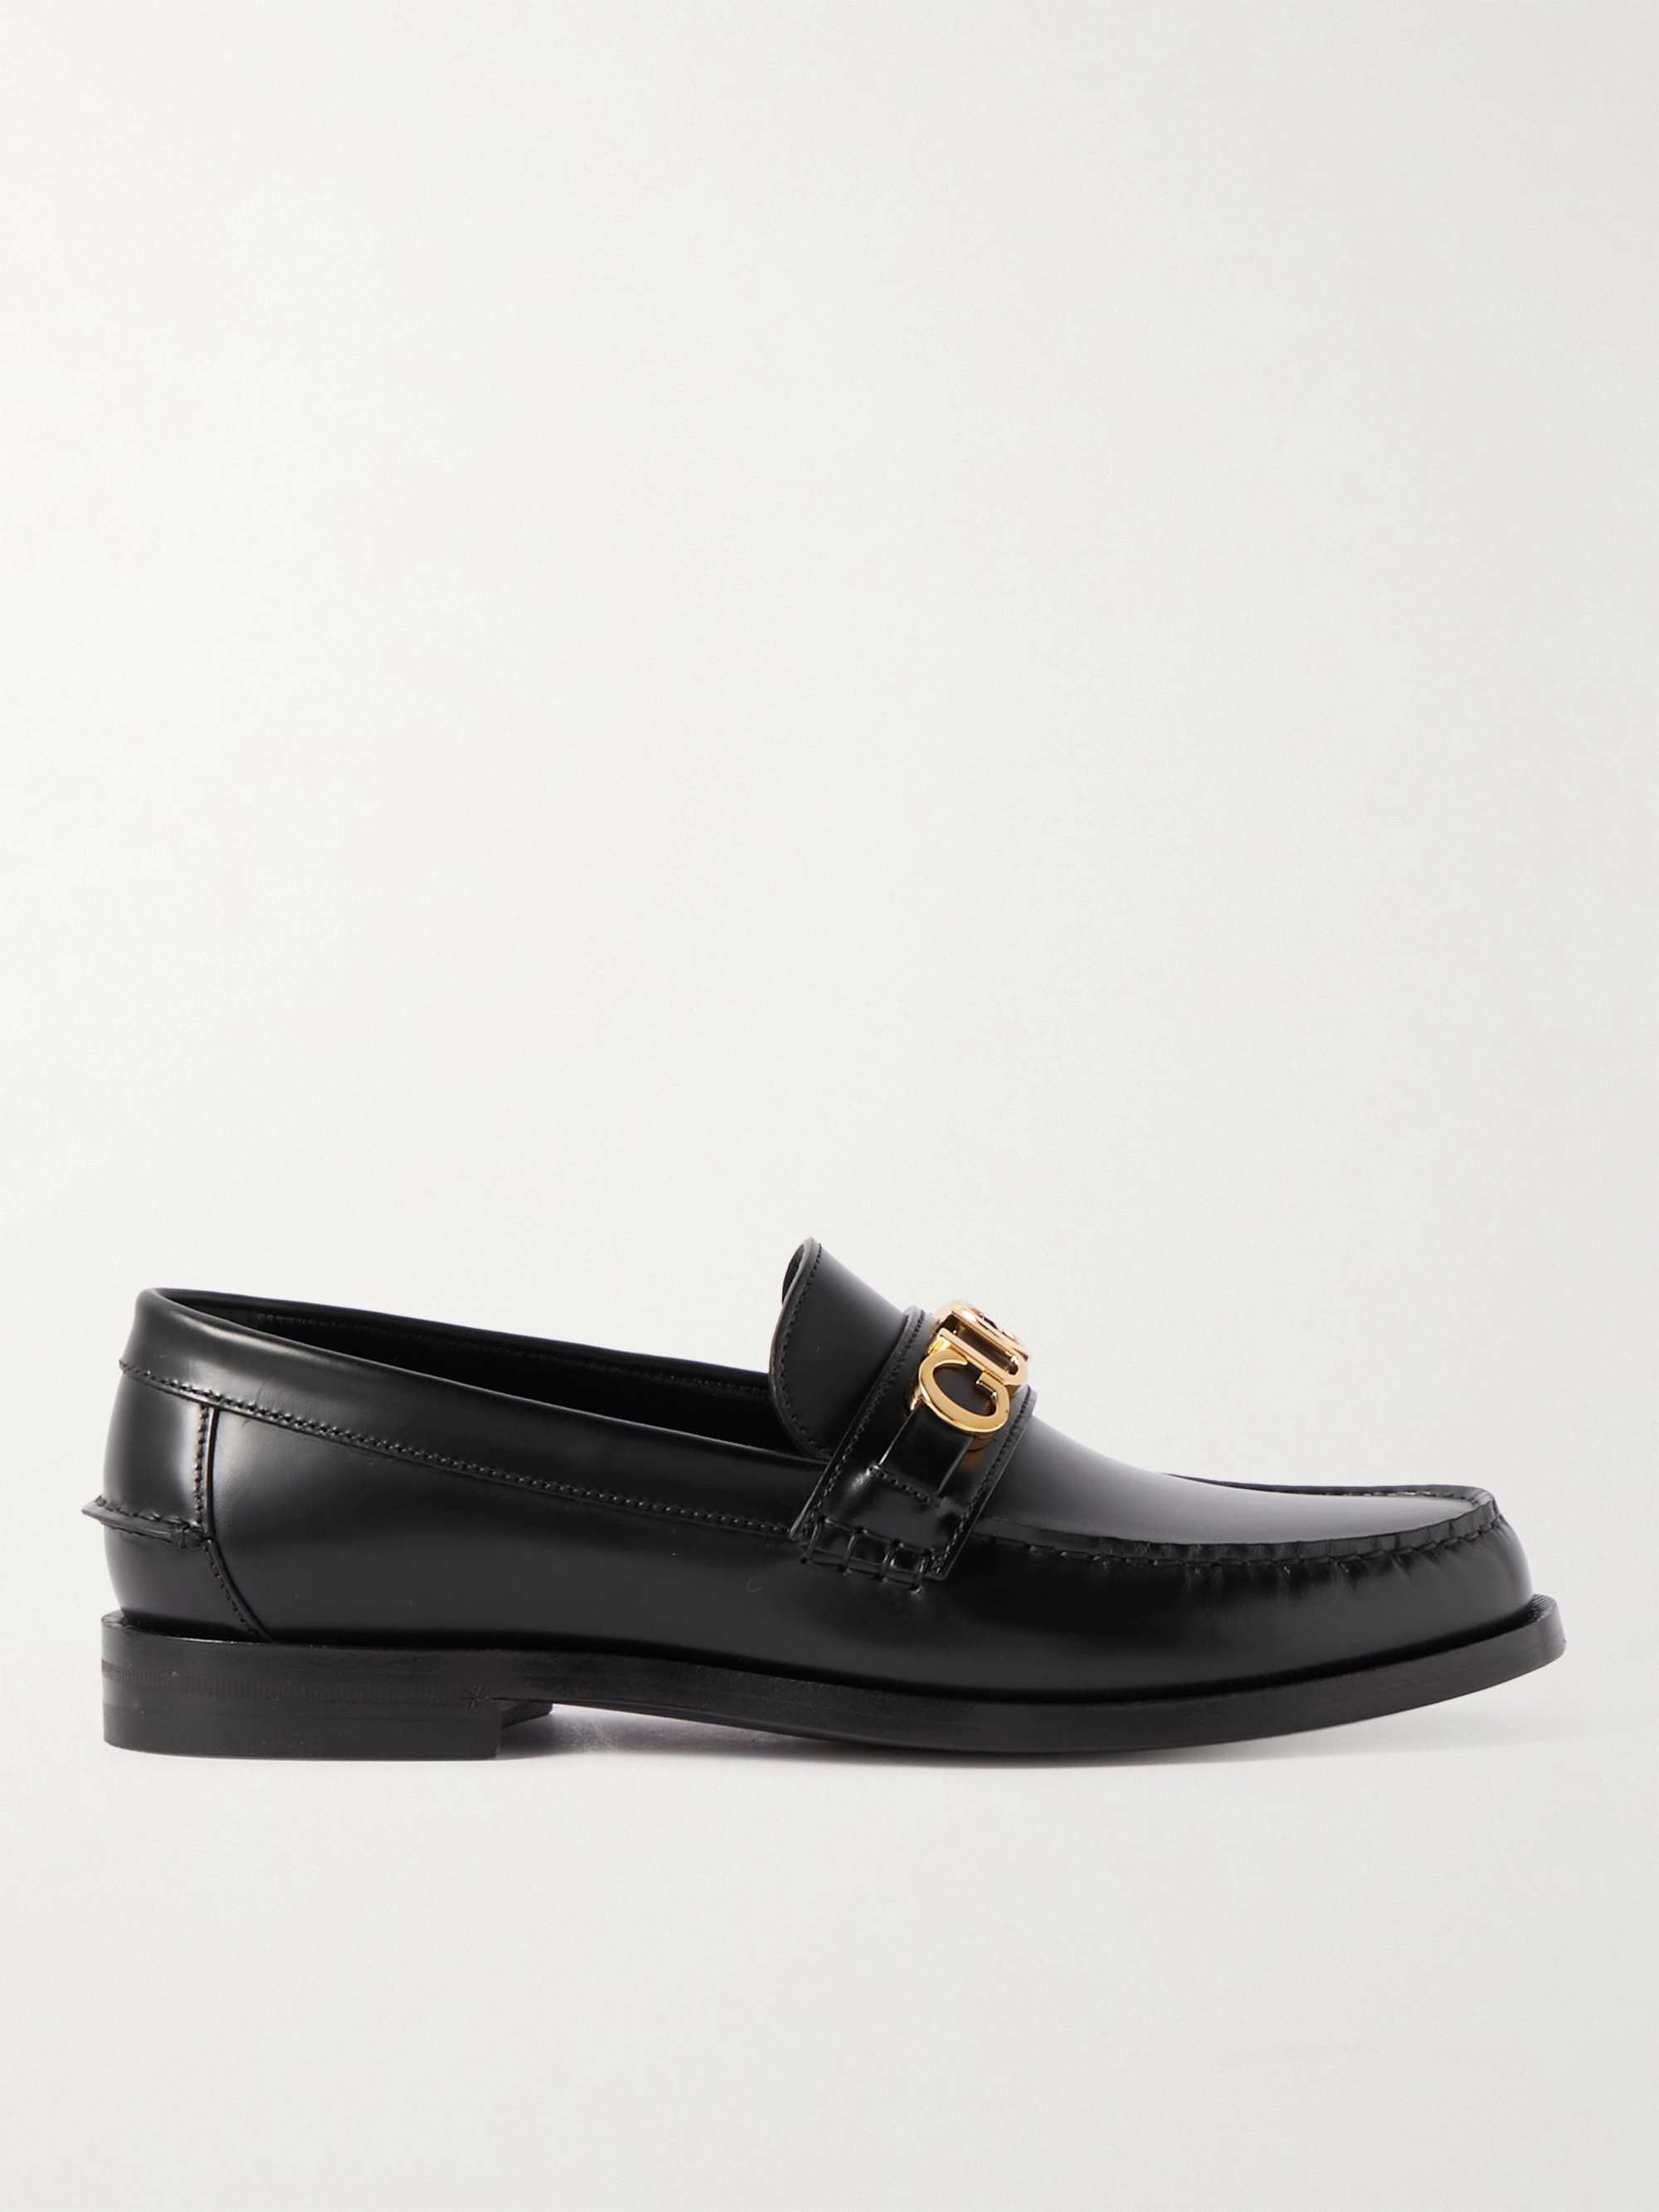 GUCCI Logo-Embellished Leather Loafers